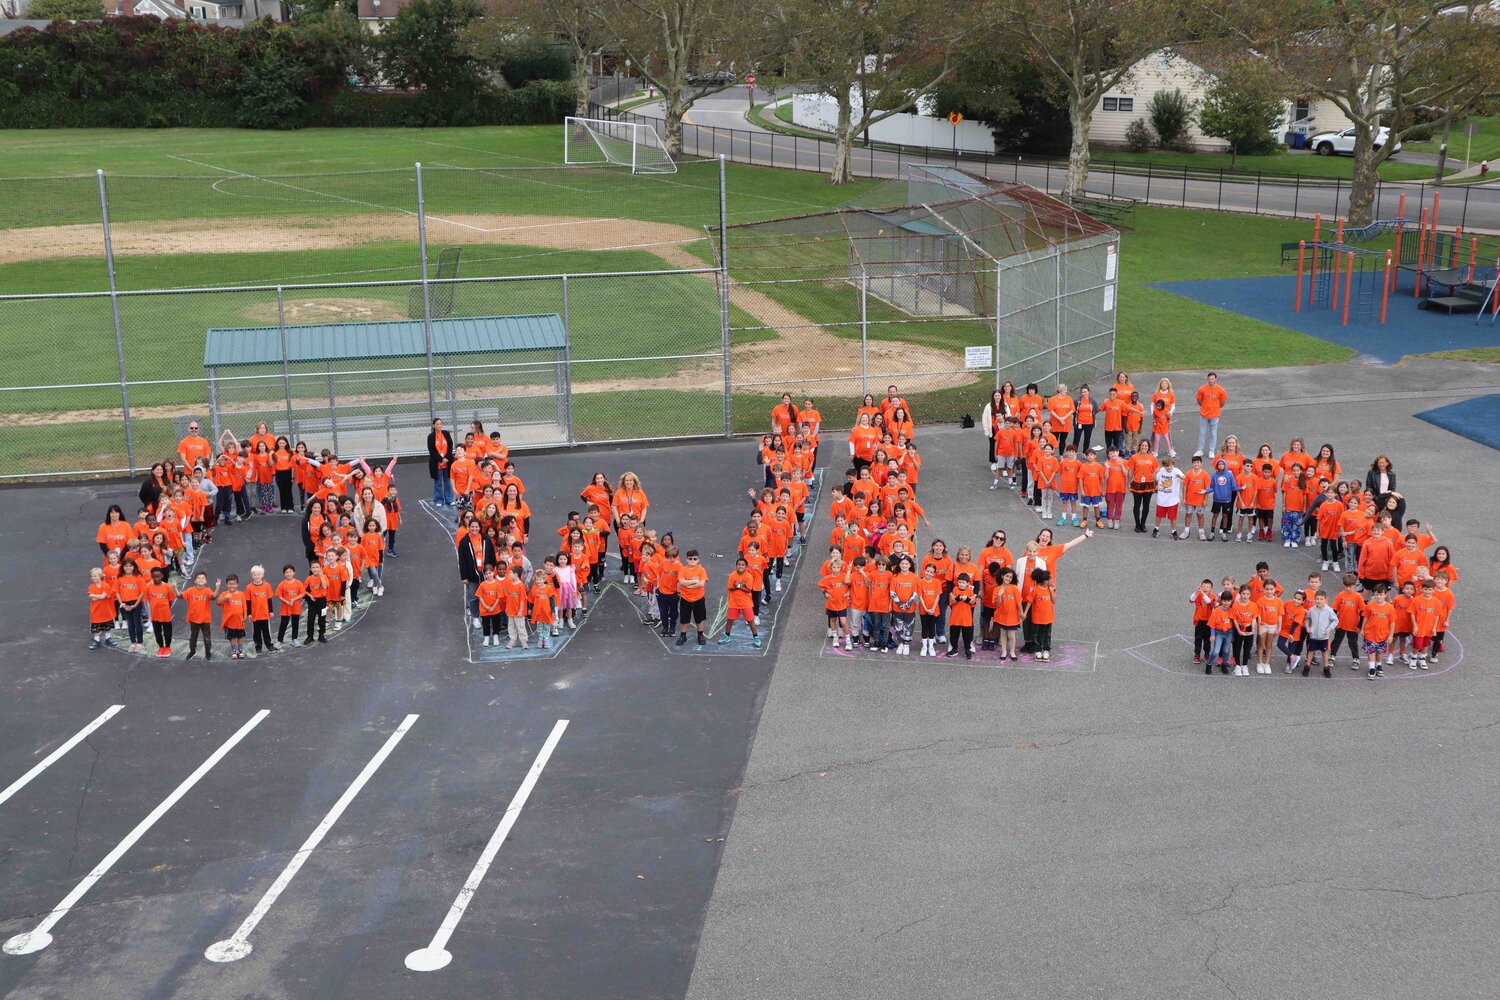 The students and staff of Waverly Park Elementary School gathered on the blacktop to spell out “OWLS” for Unity Day on Oct. 18.